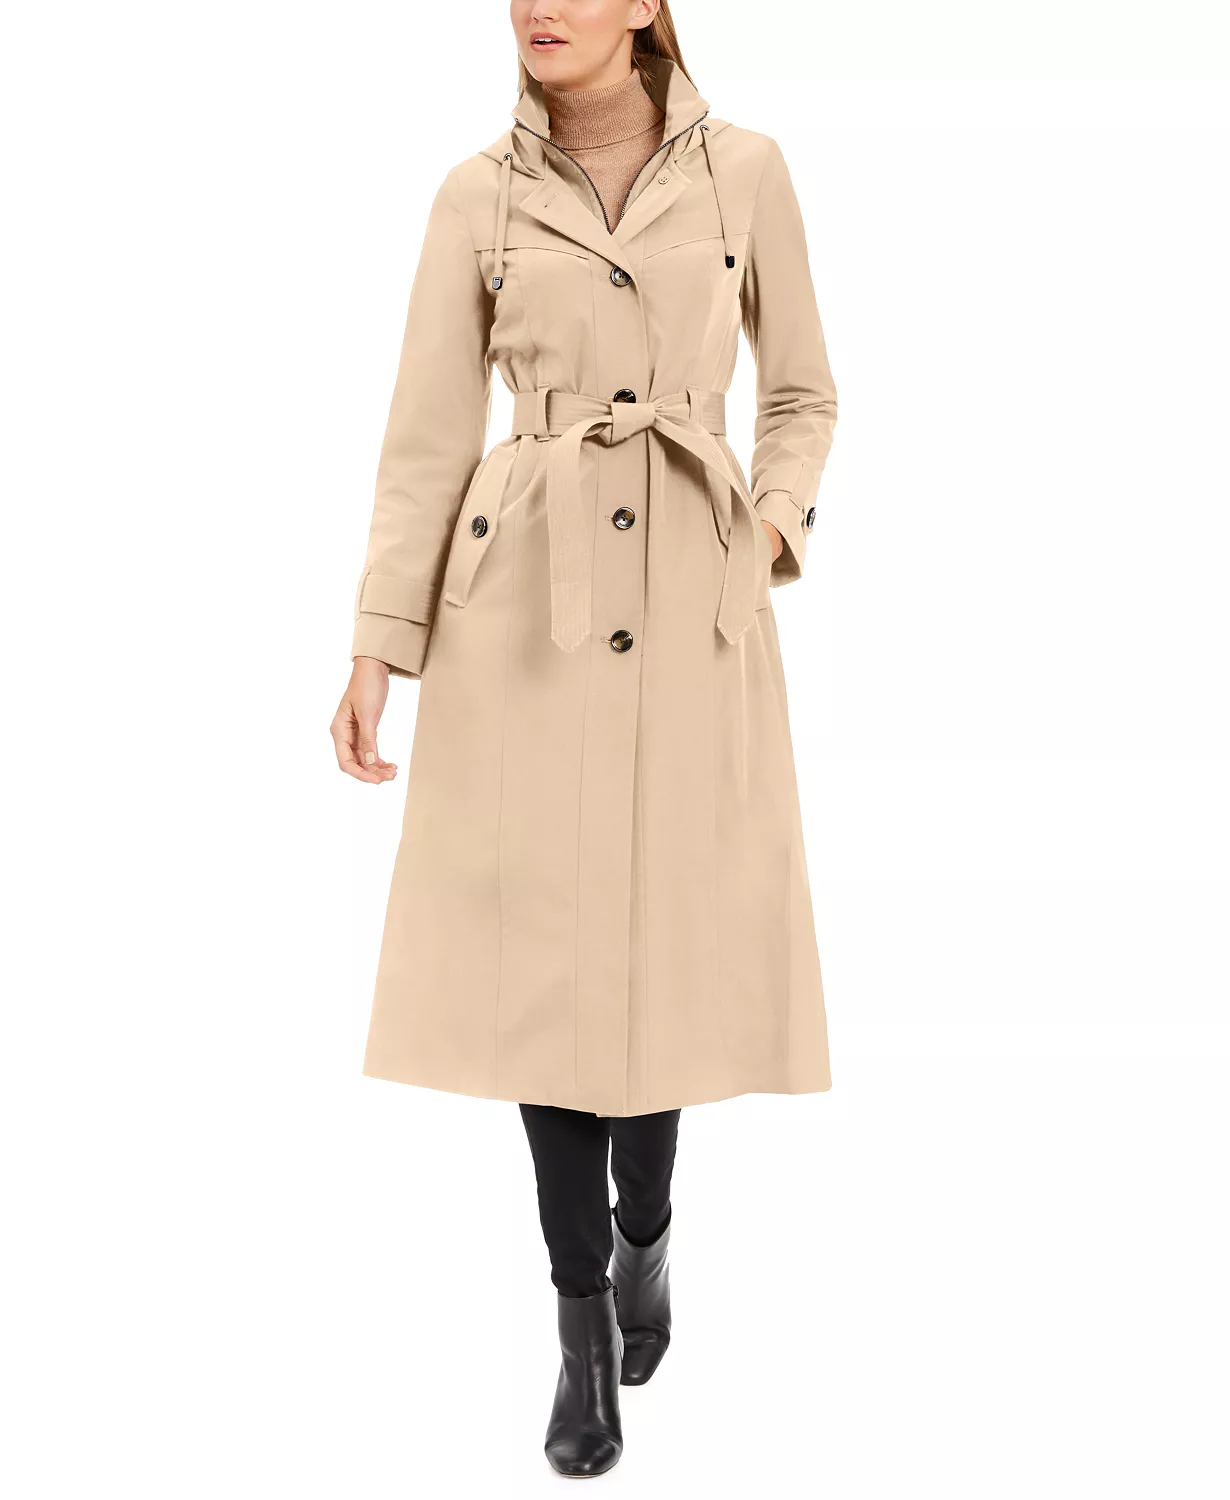 8 Classic Coats That Are Great Additions to a Capsule Wardrobe | Lola Glenn